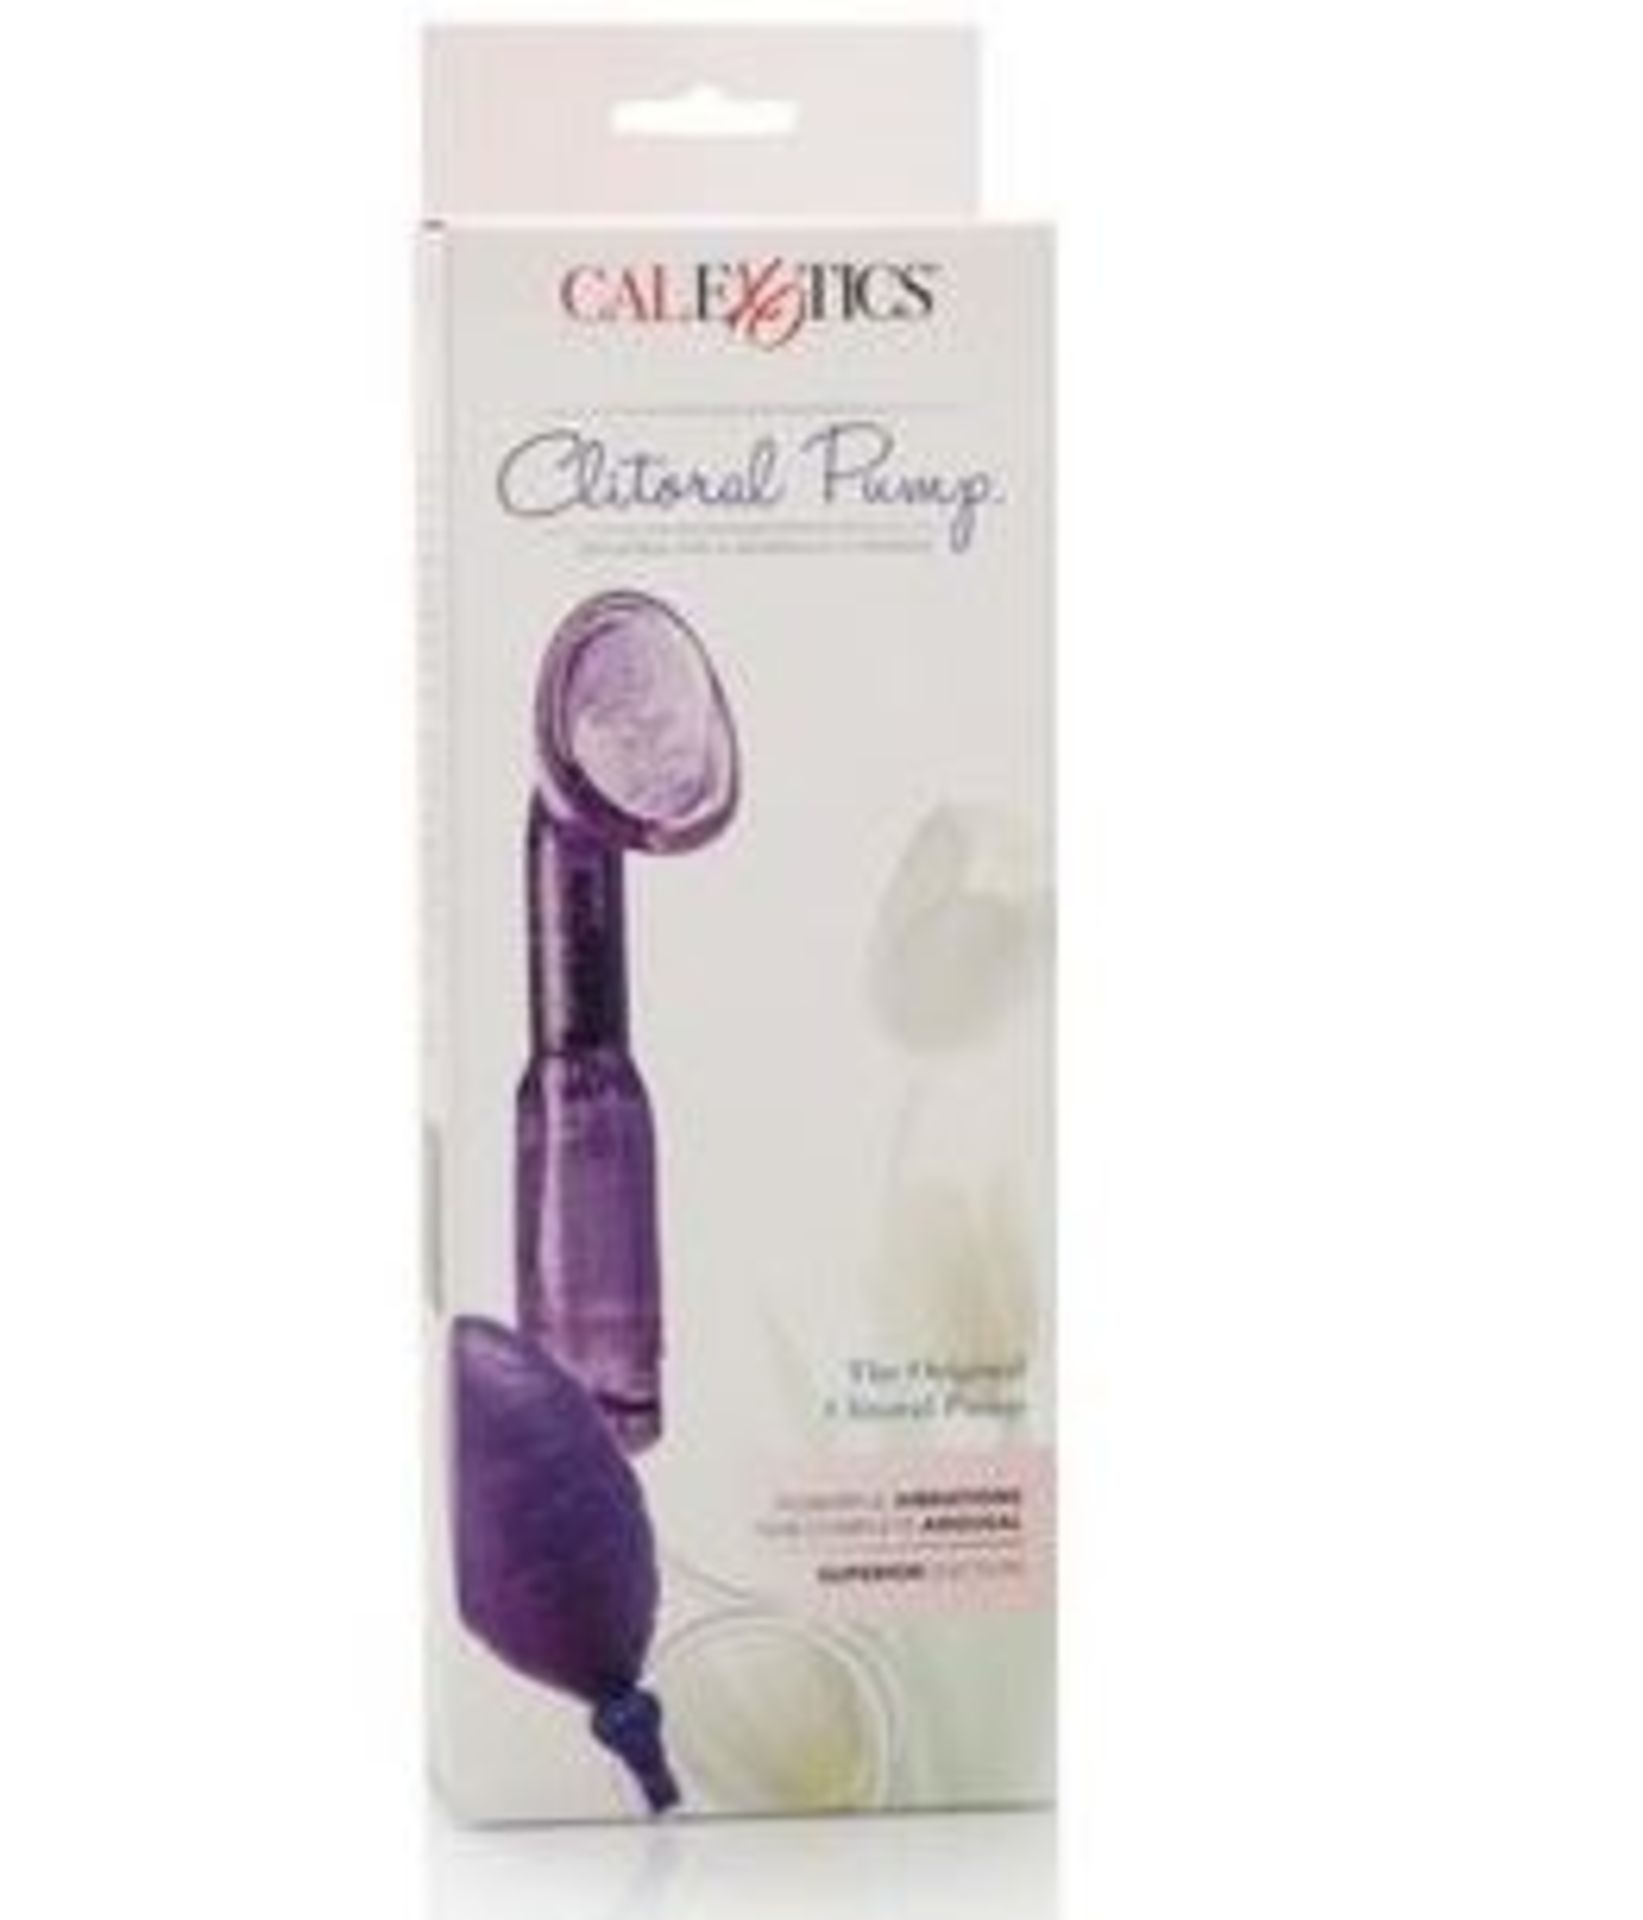 1 AS NEW BOXED CALEXTICS CLITORAL PUMP IN PURPLE RRP £ 25.99 (CONFIDENTIAL DELIVERY AVAILABLE)